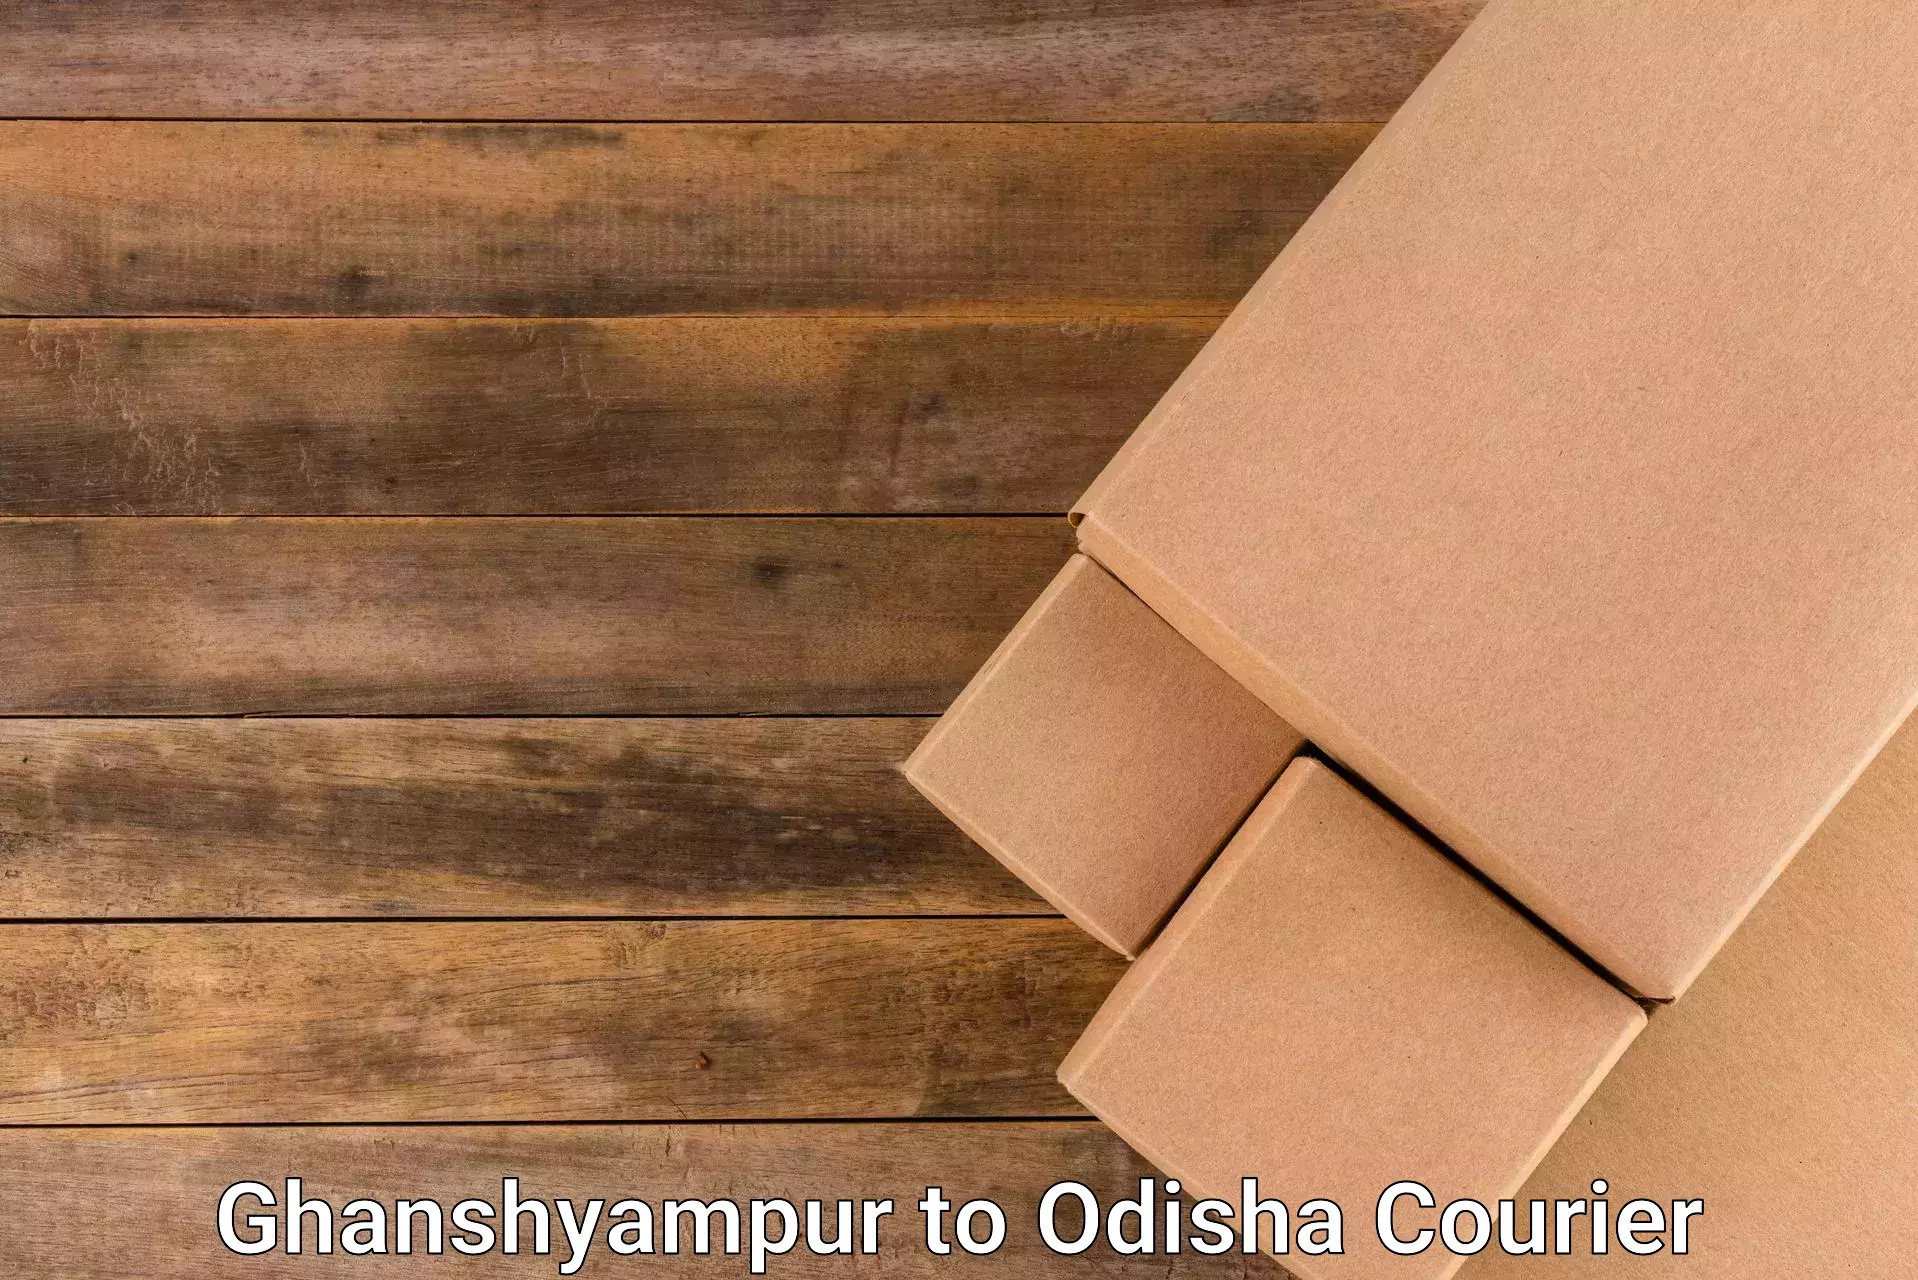 Sustainable courier practices Ghanshyampur to Nilagiri